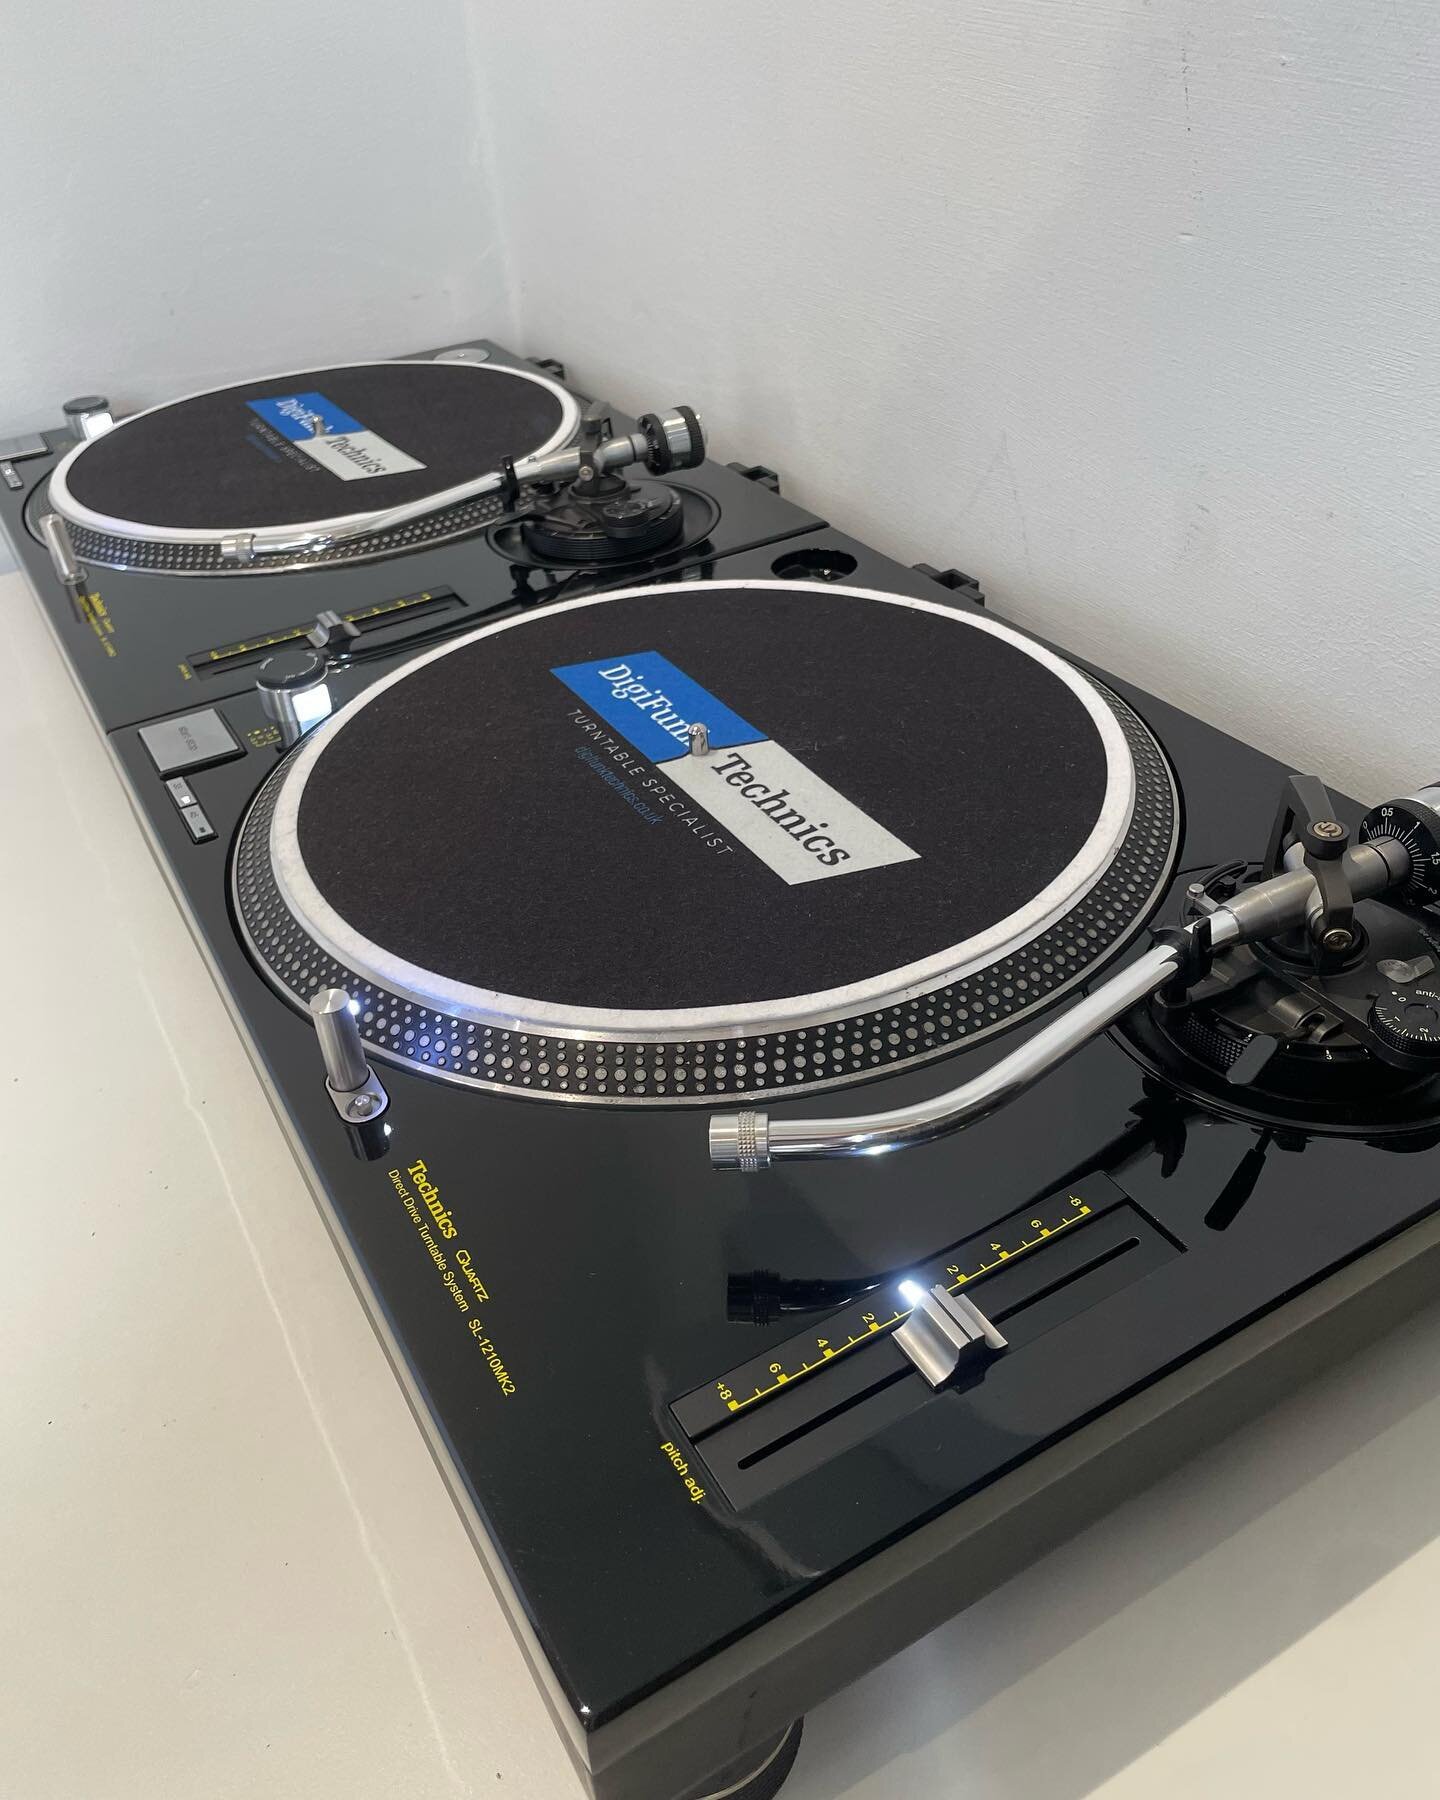 These have had lots of attention from customers seeing them in the office the last week&hellip;

Gloss Black cabinets, Yellow Graphics, Bright White LEDs, Serviced and calibrated and just shipped out to customer 😁

#technics #technics1210 #turntable